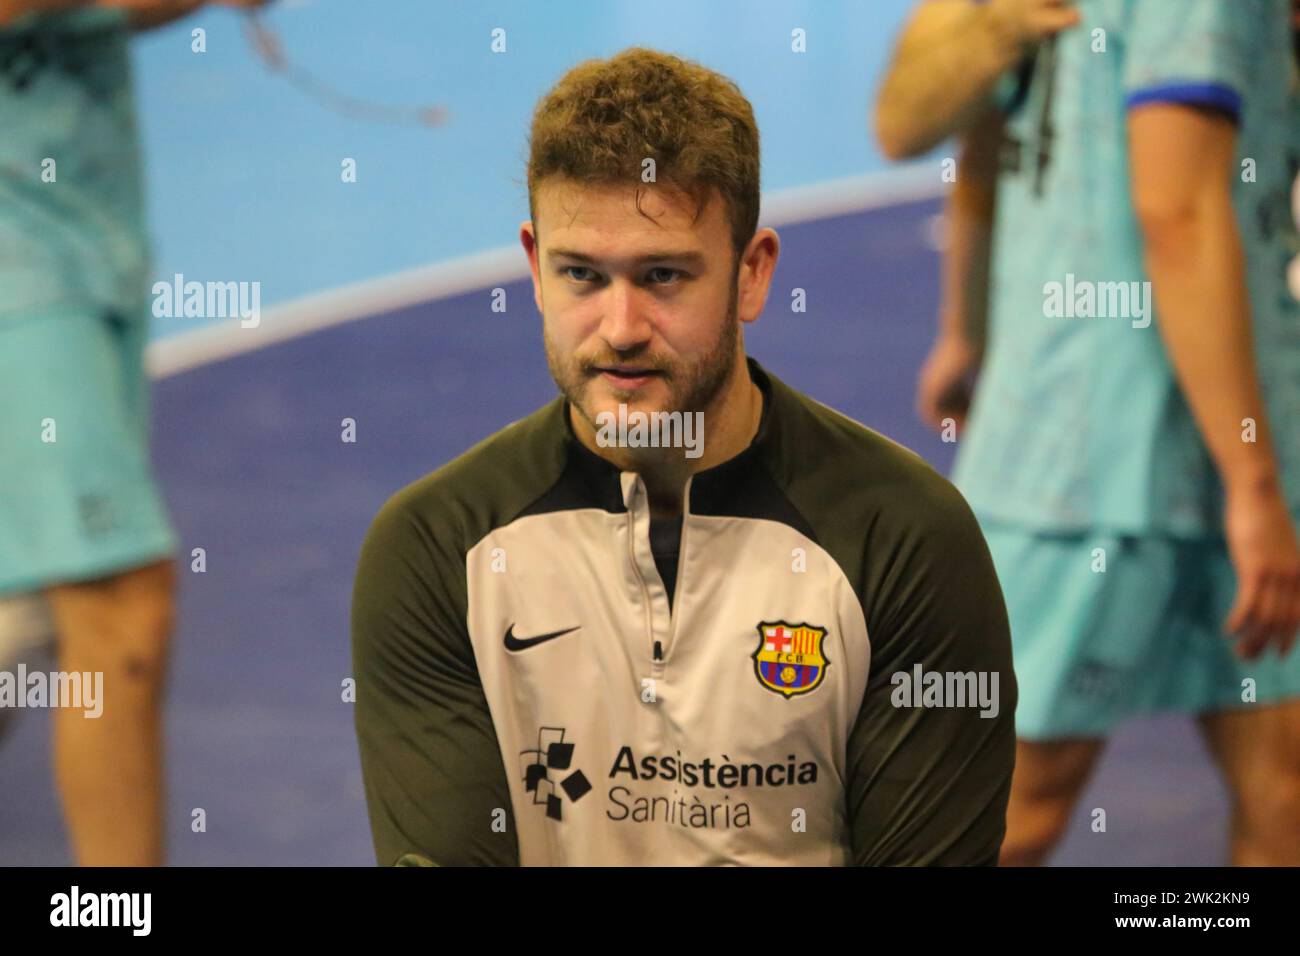 Torrelavega, Spain. 17th Feb, 2024. Barça's goalkeeper, Gonzalo Perez de Vargas (1) approaches the stands during the 18th matchday of the Plenitude League between Bathco BM. Torrelavega and Barça, on February 17, 2024, at the Vicente Trueba Municipal Pavilion in Torrelavega, Spain. (Photo by Alberto Brevers/Pacific Press) Credit: Pacific Press Media Production Corp./Alamy Live News Stock Photo